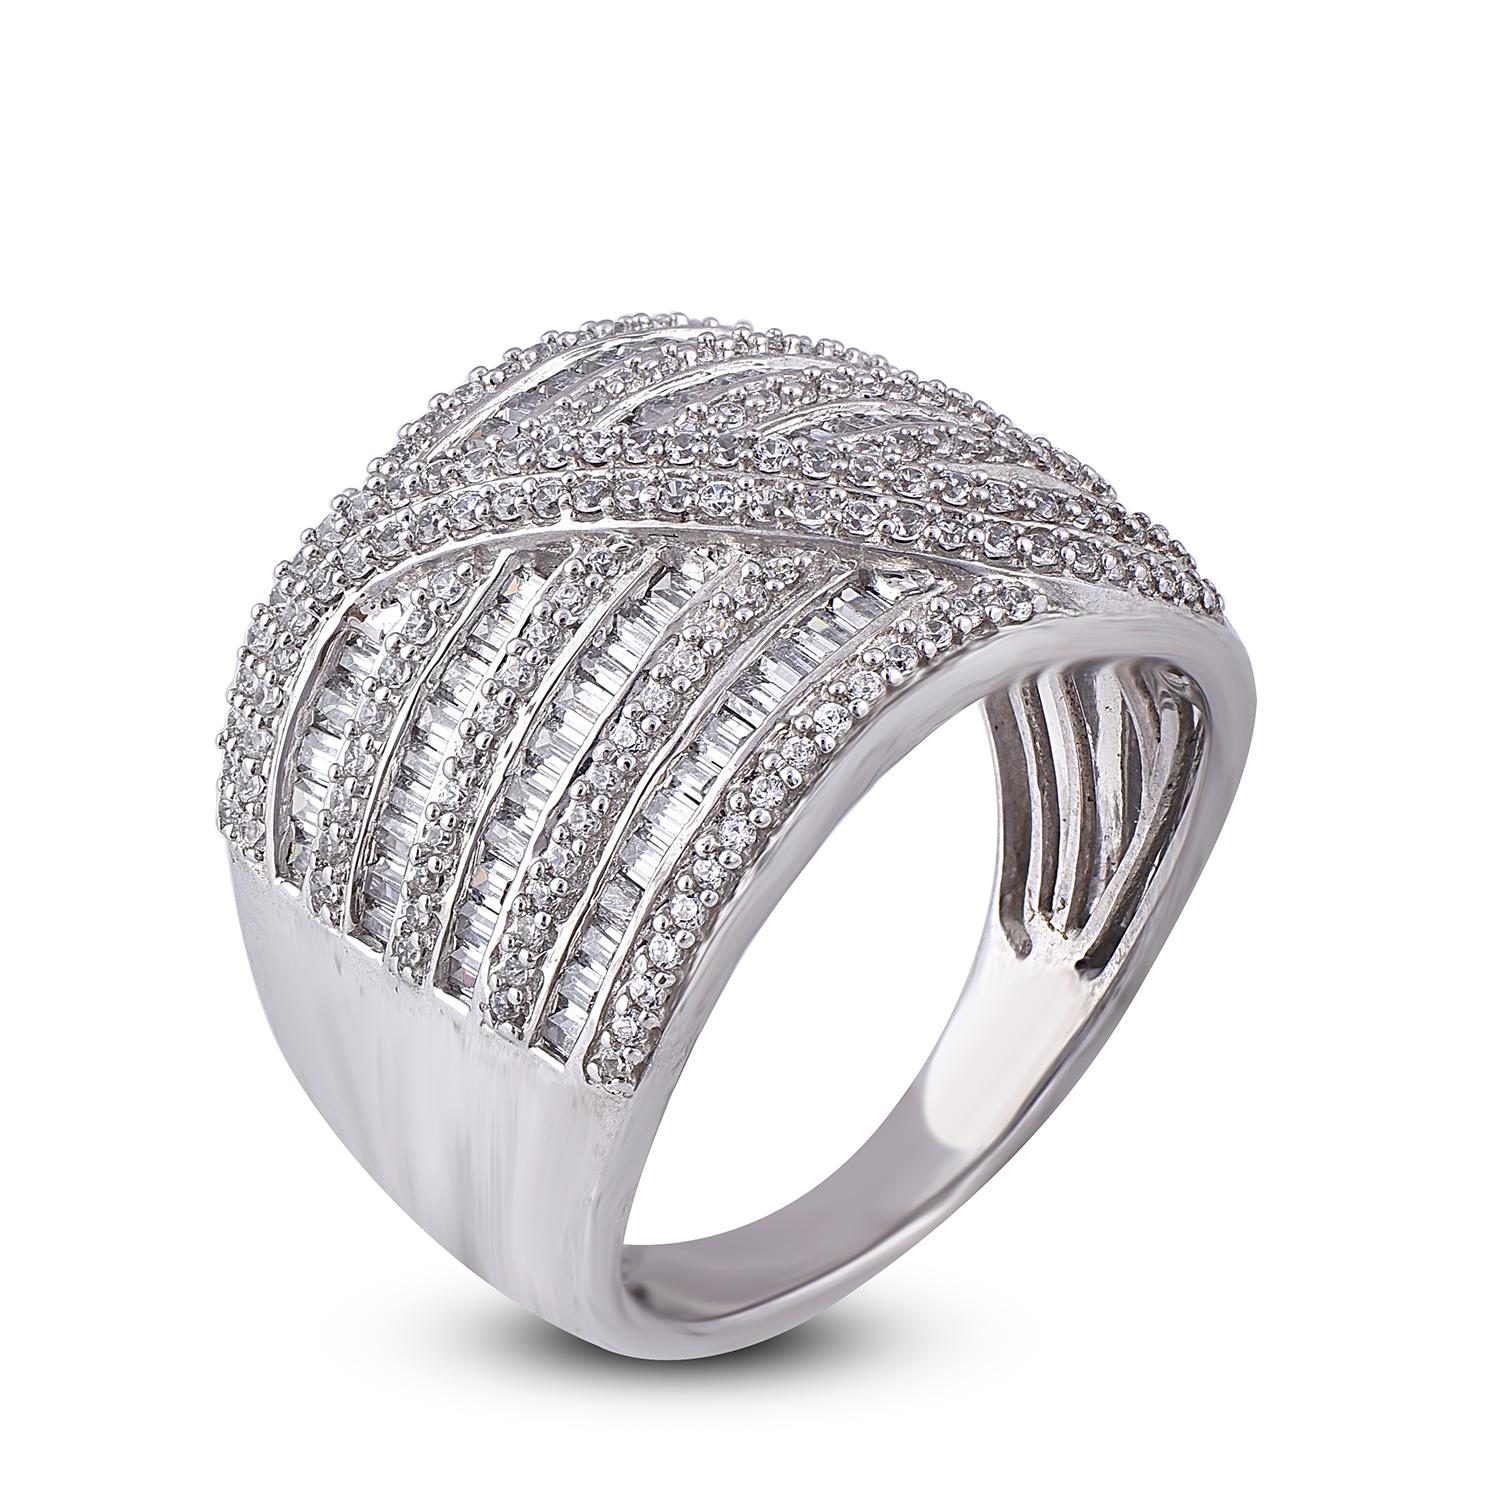 Unique design crisscross diamond ring is studded with 154 natural diamond and 92 Baguette cut diamond beautifully set in prong and channel setting. Fashioned in 14 karat White gold and 1.00 ct total diamond weight H-I color I2 Clarity
